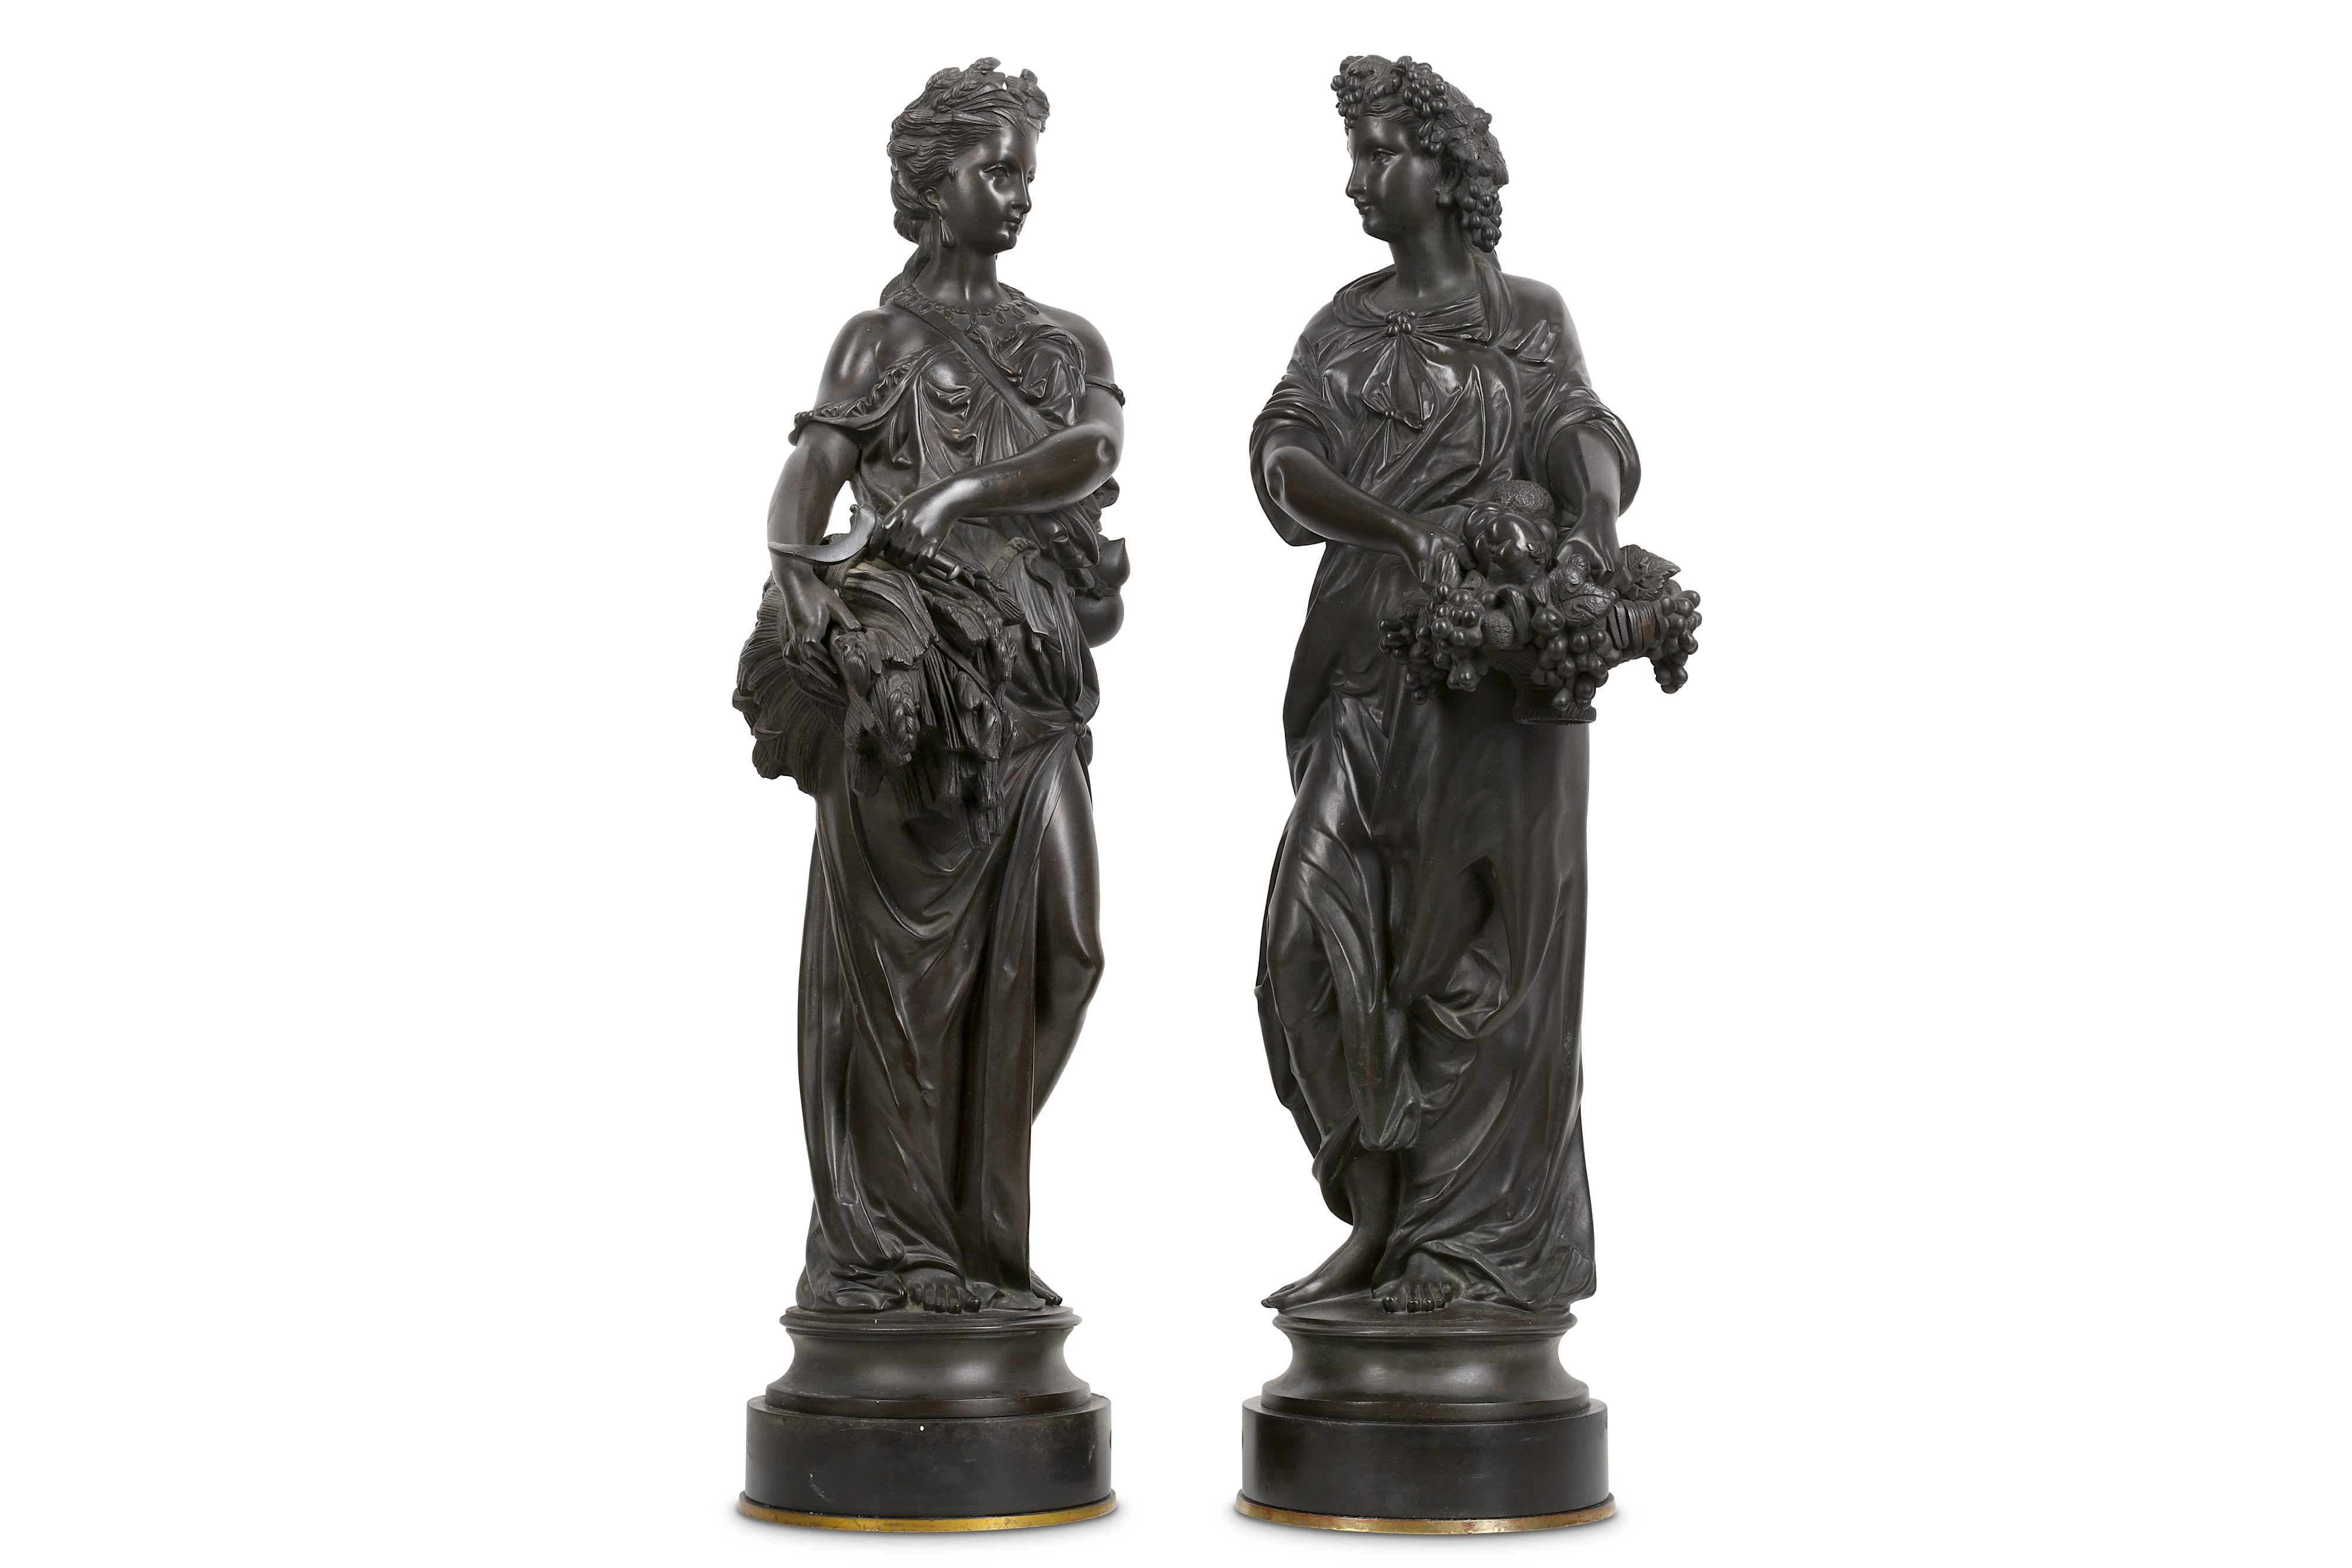 PAUL DUBOIS (FRENCH, 1829-1905): A PAIR OF BRONZE FIGURES OF MAIDENS